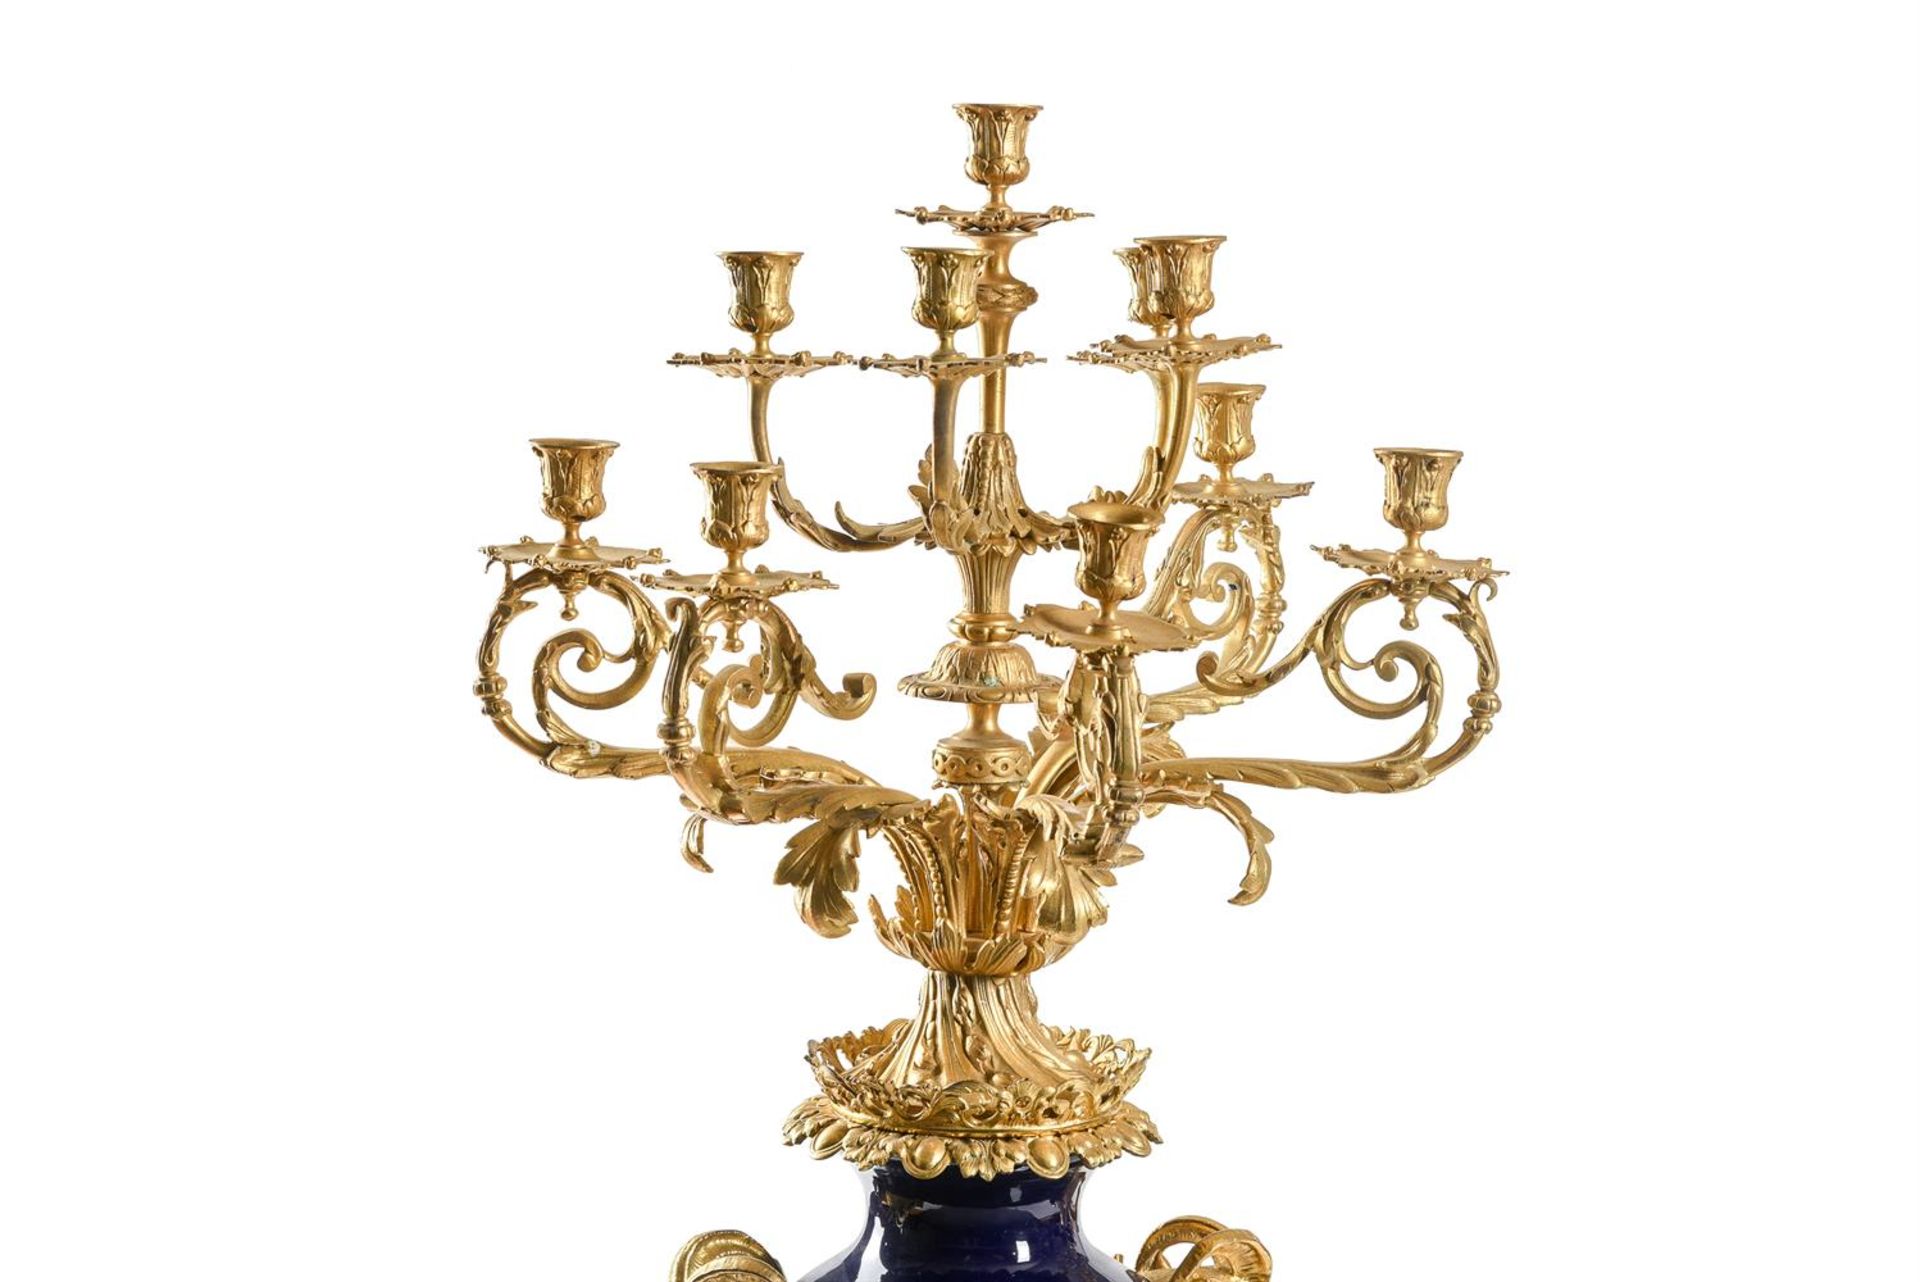 A PAIR OF ORMOLU MOUNTED BLUE PORCELAIN TEN LIGHT URN CANDELABRA, FRENCH, EARLY 20TH CENTURY - Image 4 of 5